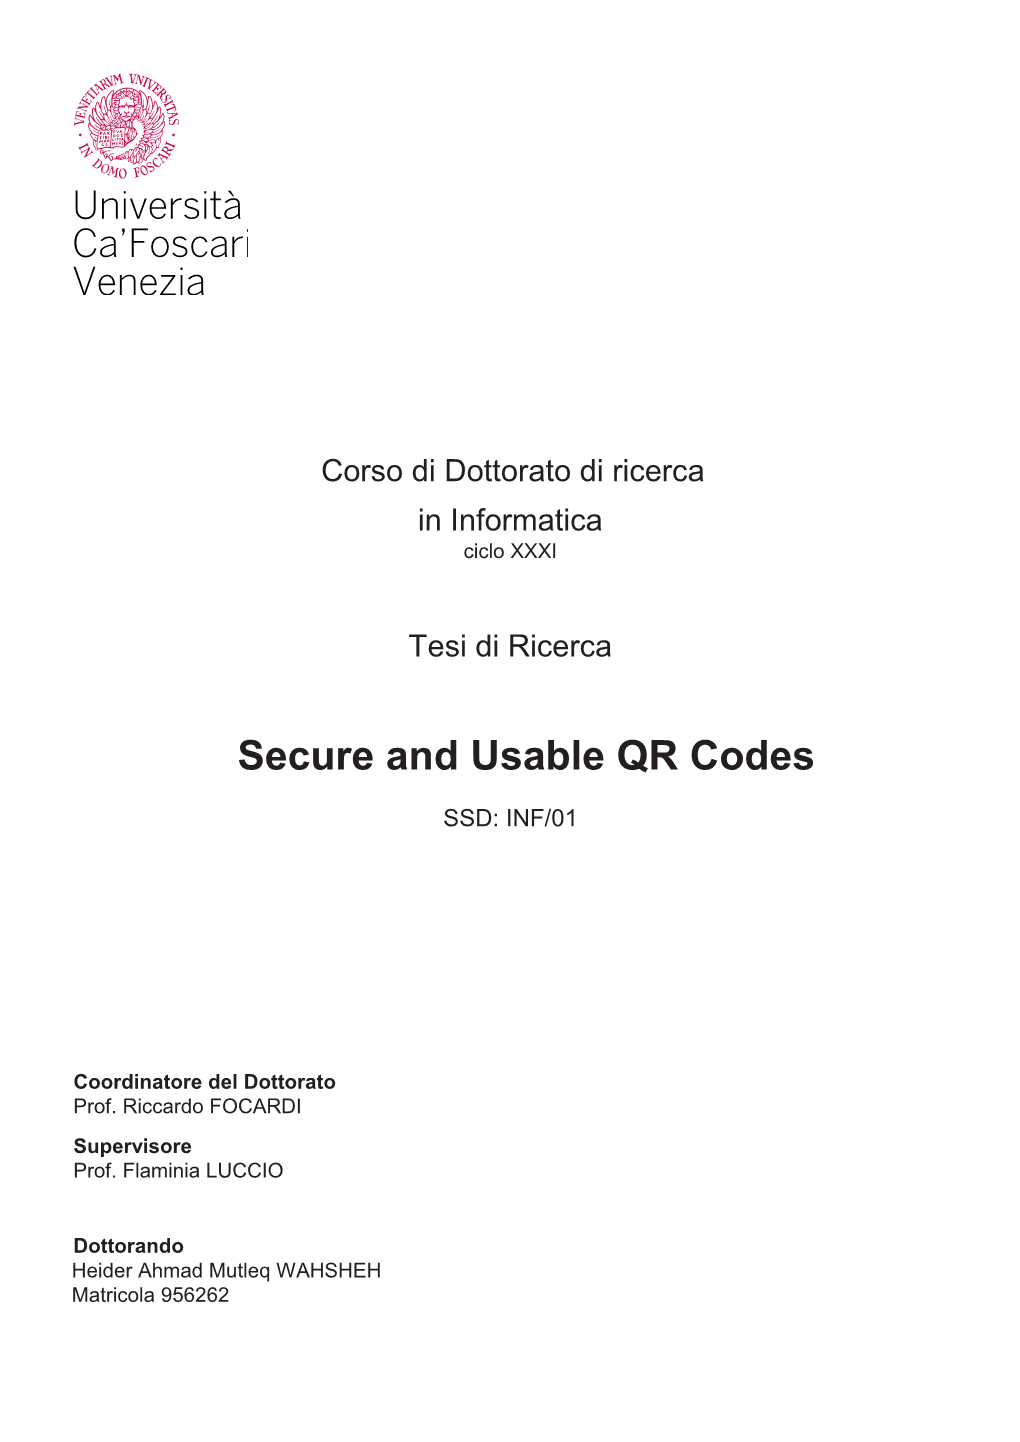 Secure and Usable QR Codes